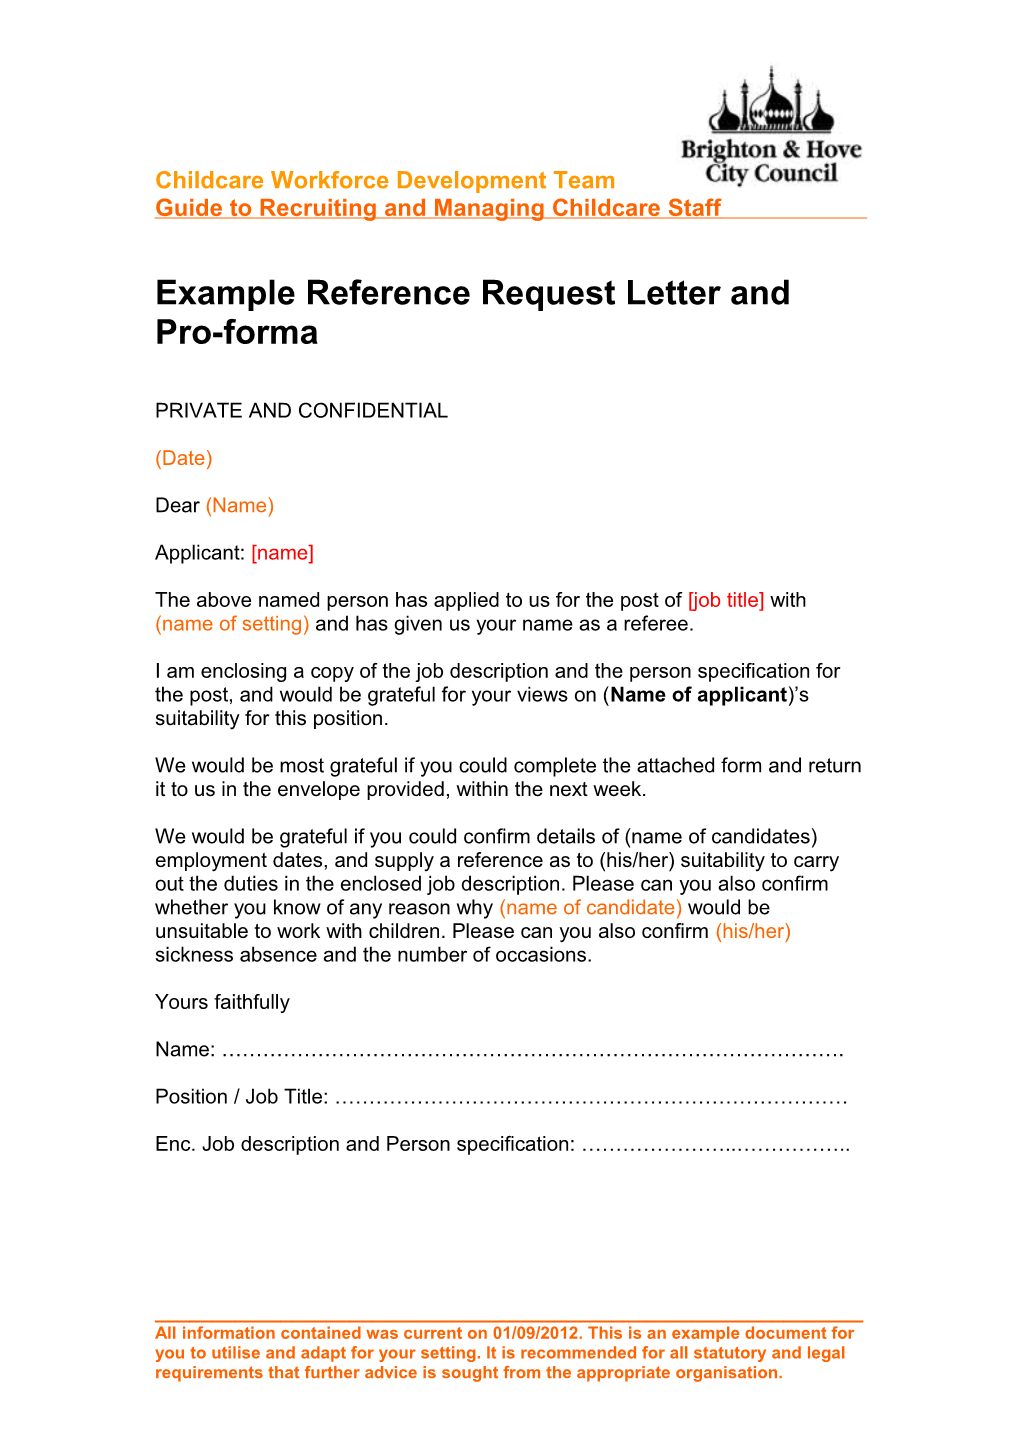 Example Reference Request Letter and Pro-Forma